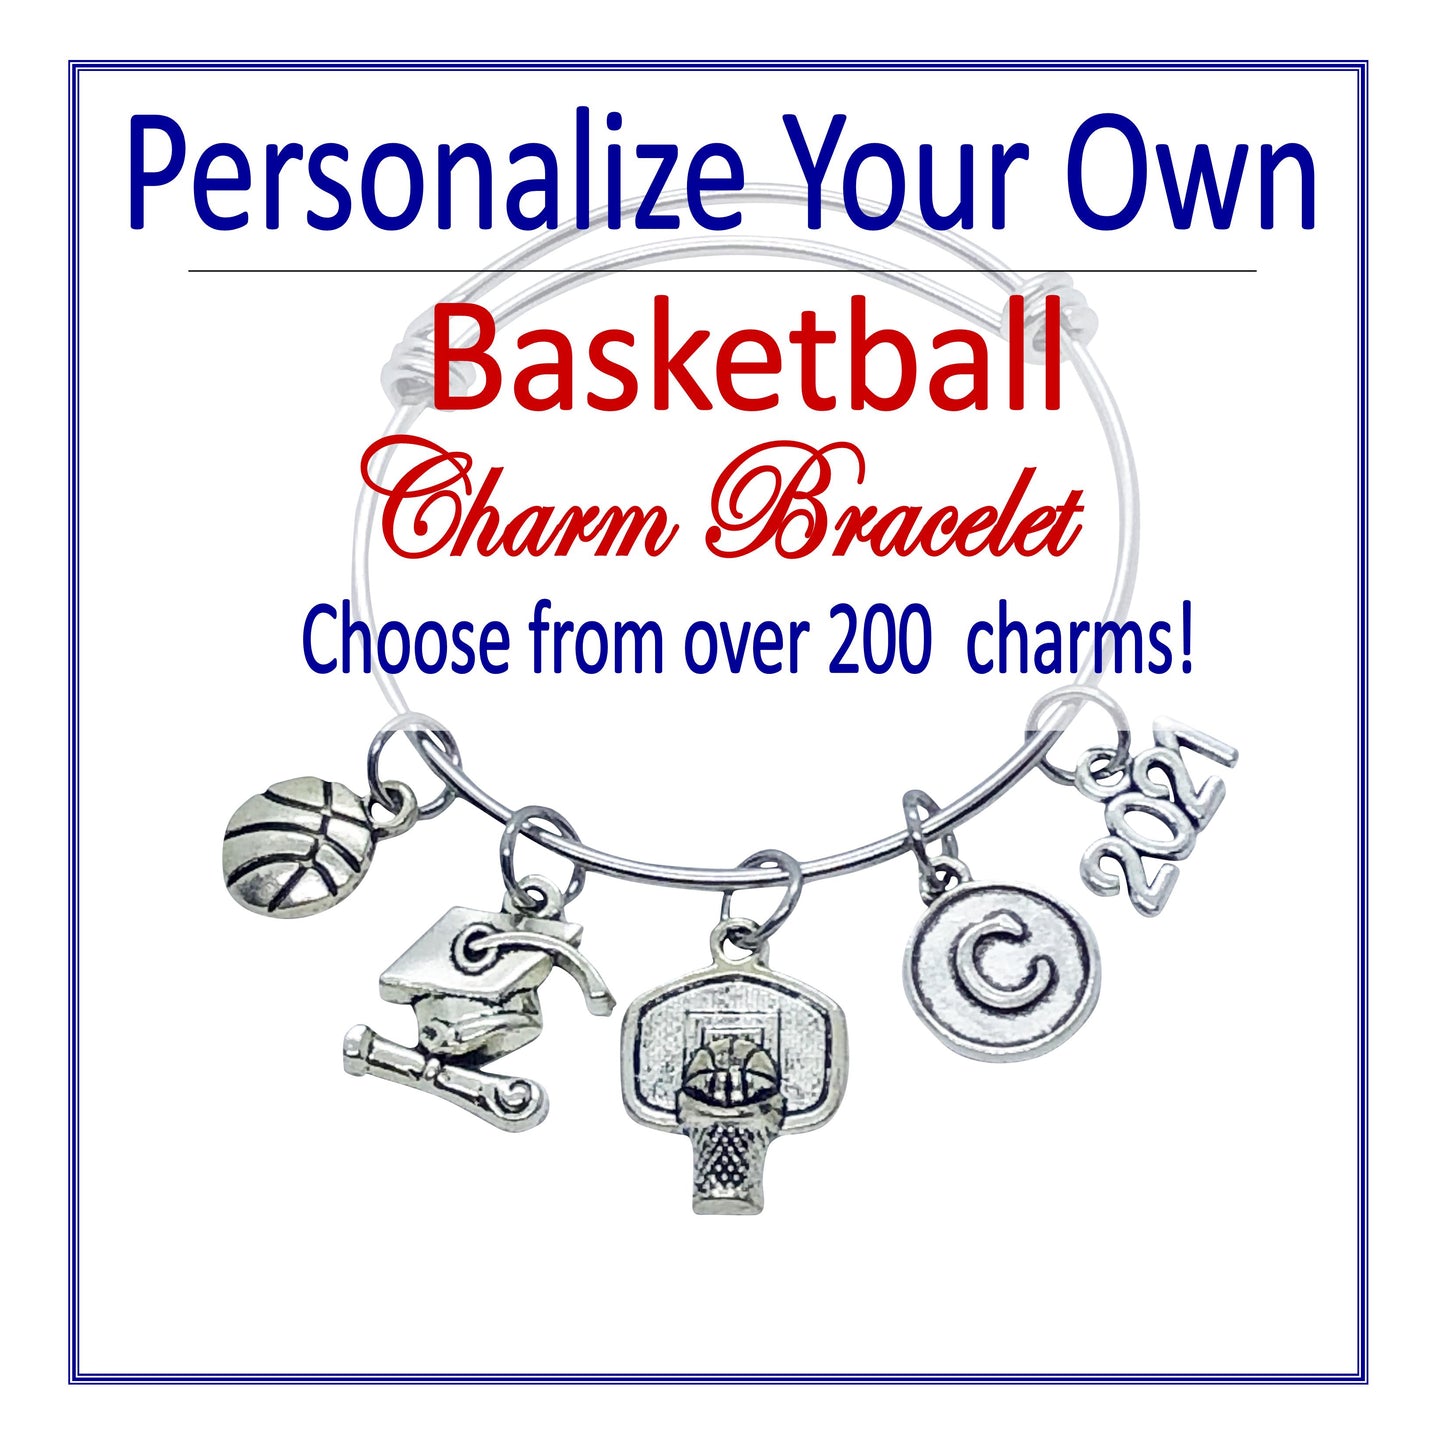 Create Your Own Basketball Charm Bracelet - Cheer and Dance On Demand